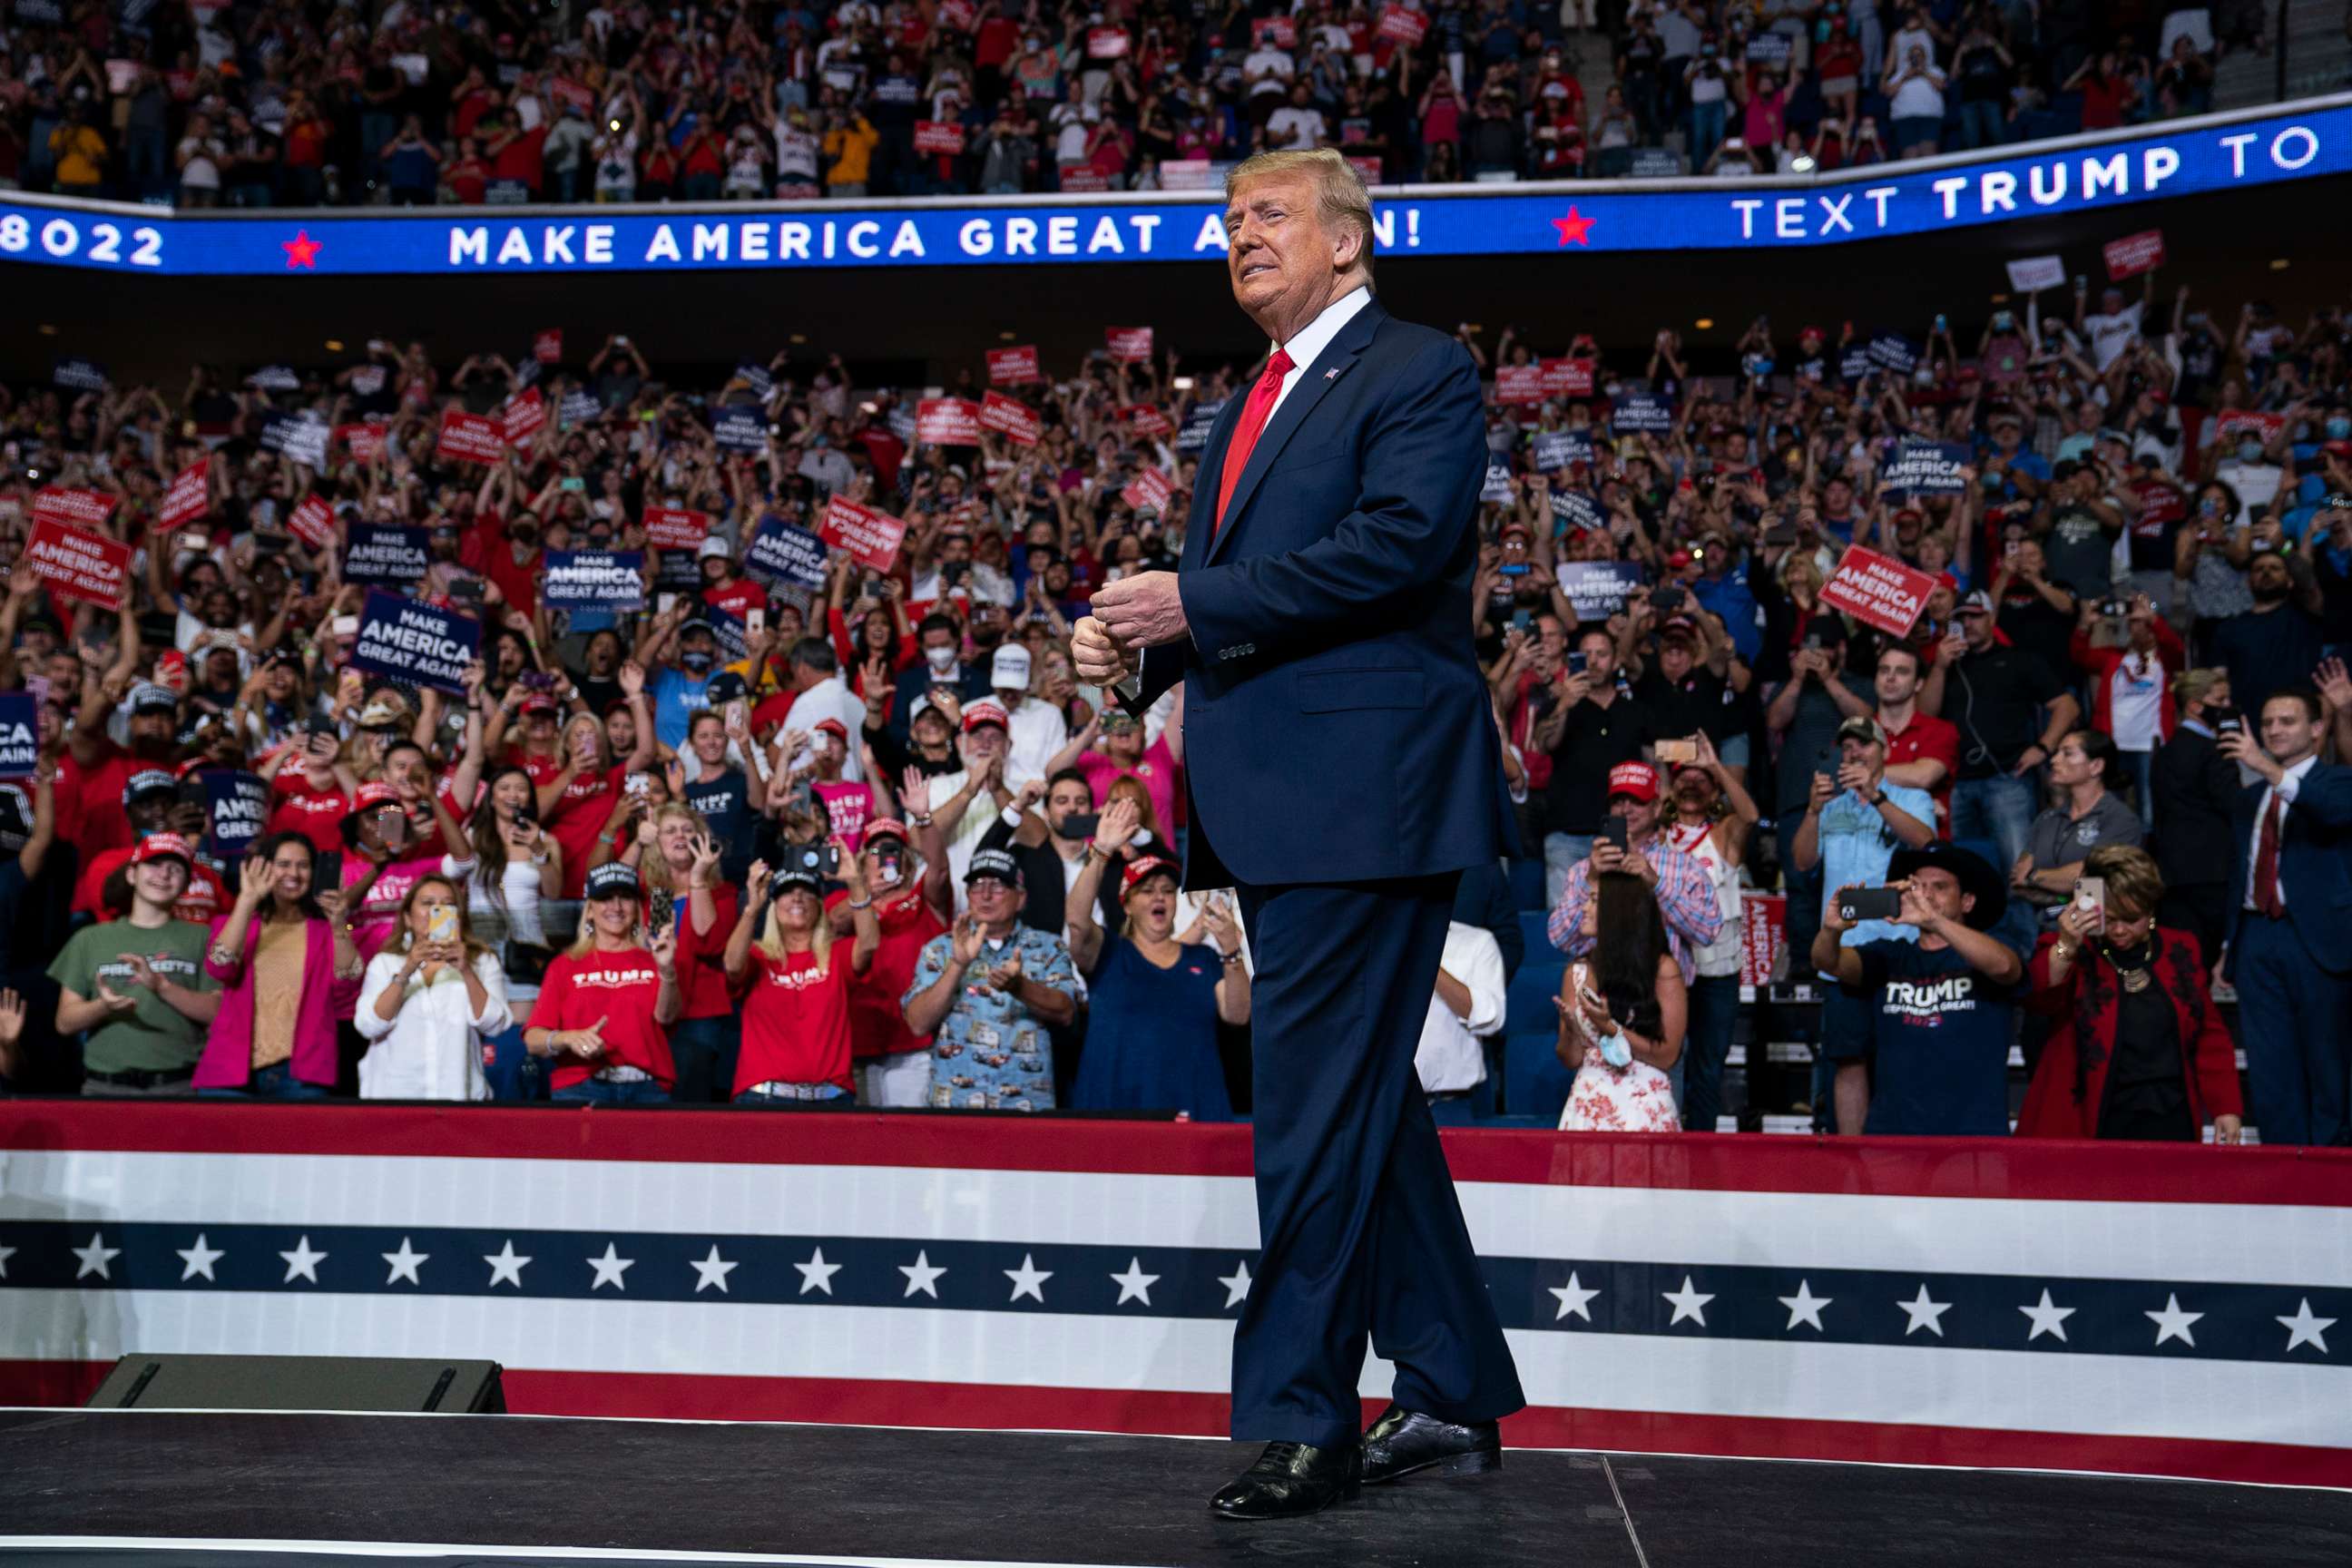 PHOTO: In this June 20, 2020, file photo, President Donald Trump arrives on stage to speak at a campaign rally at the BOK Center in Tulsa, Okla.